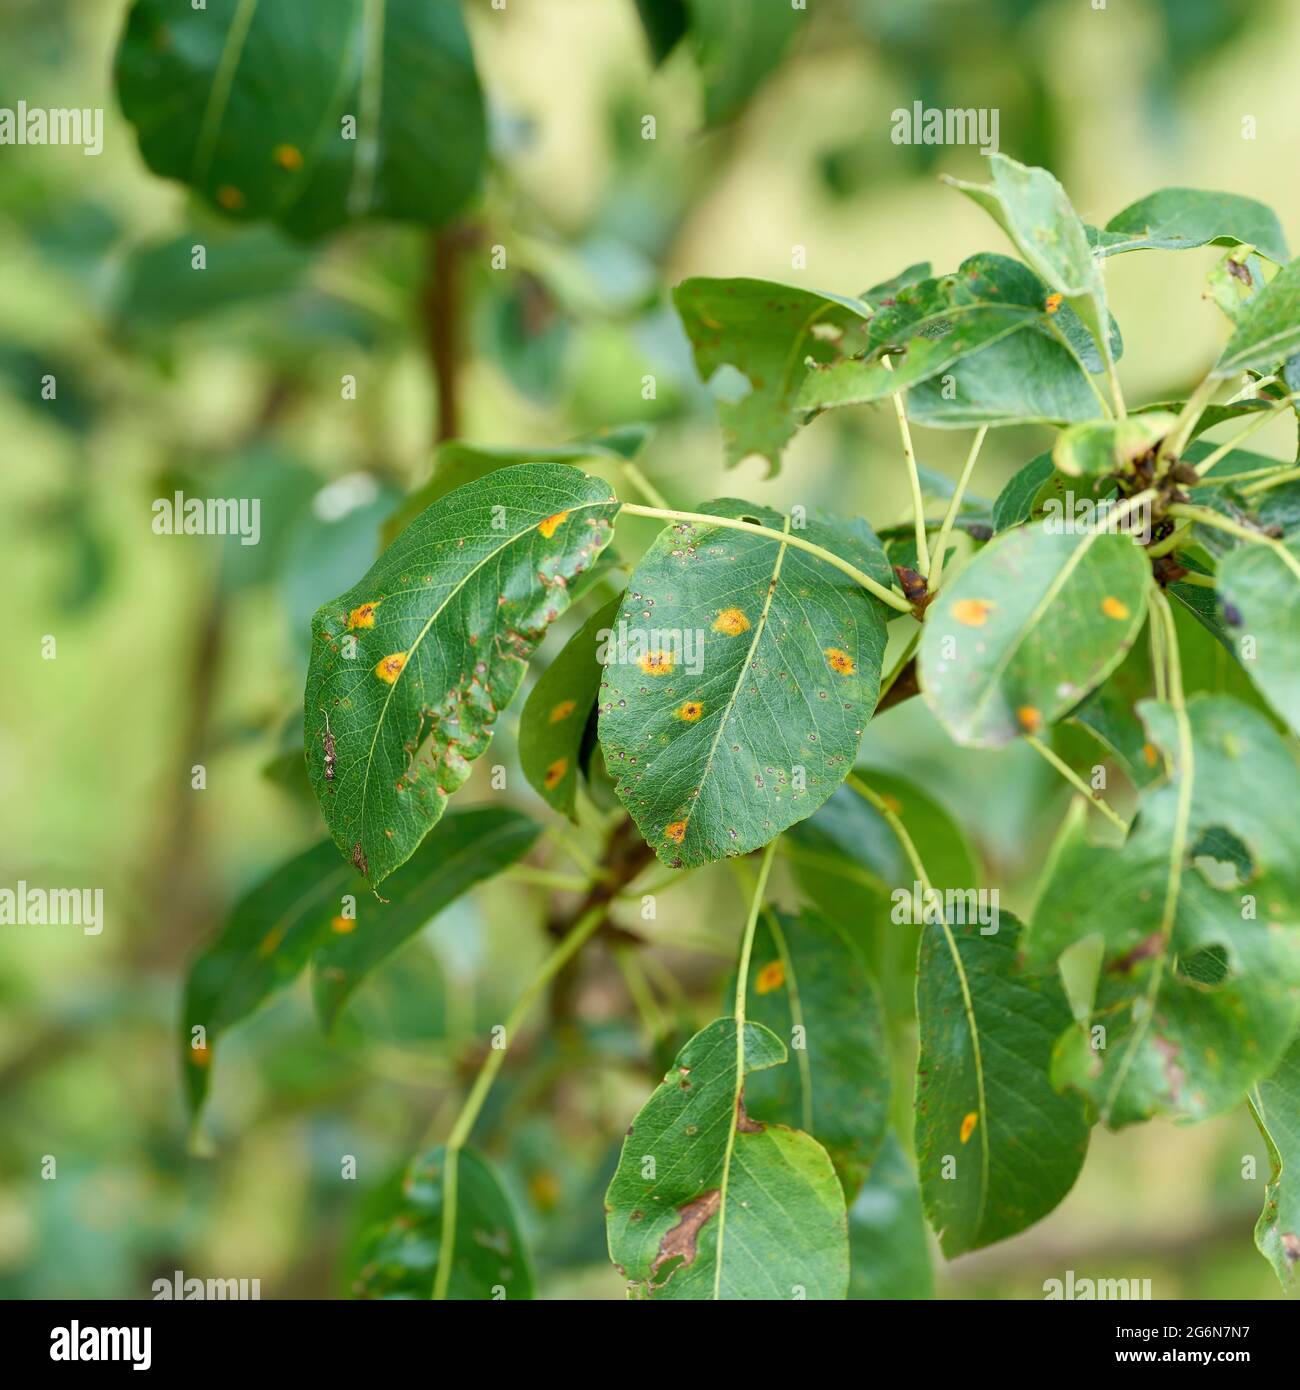 the fungal disease pear rust transmitted by the fungus Gymnosporangium sabinae on a pear tree in the garden in summer Stock Photo